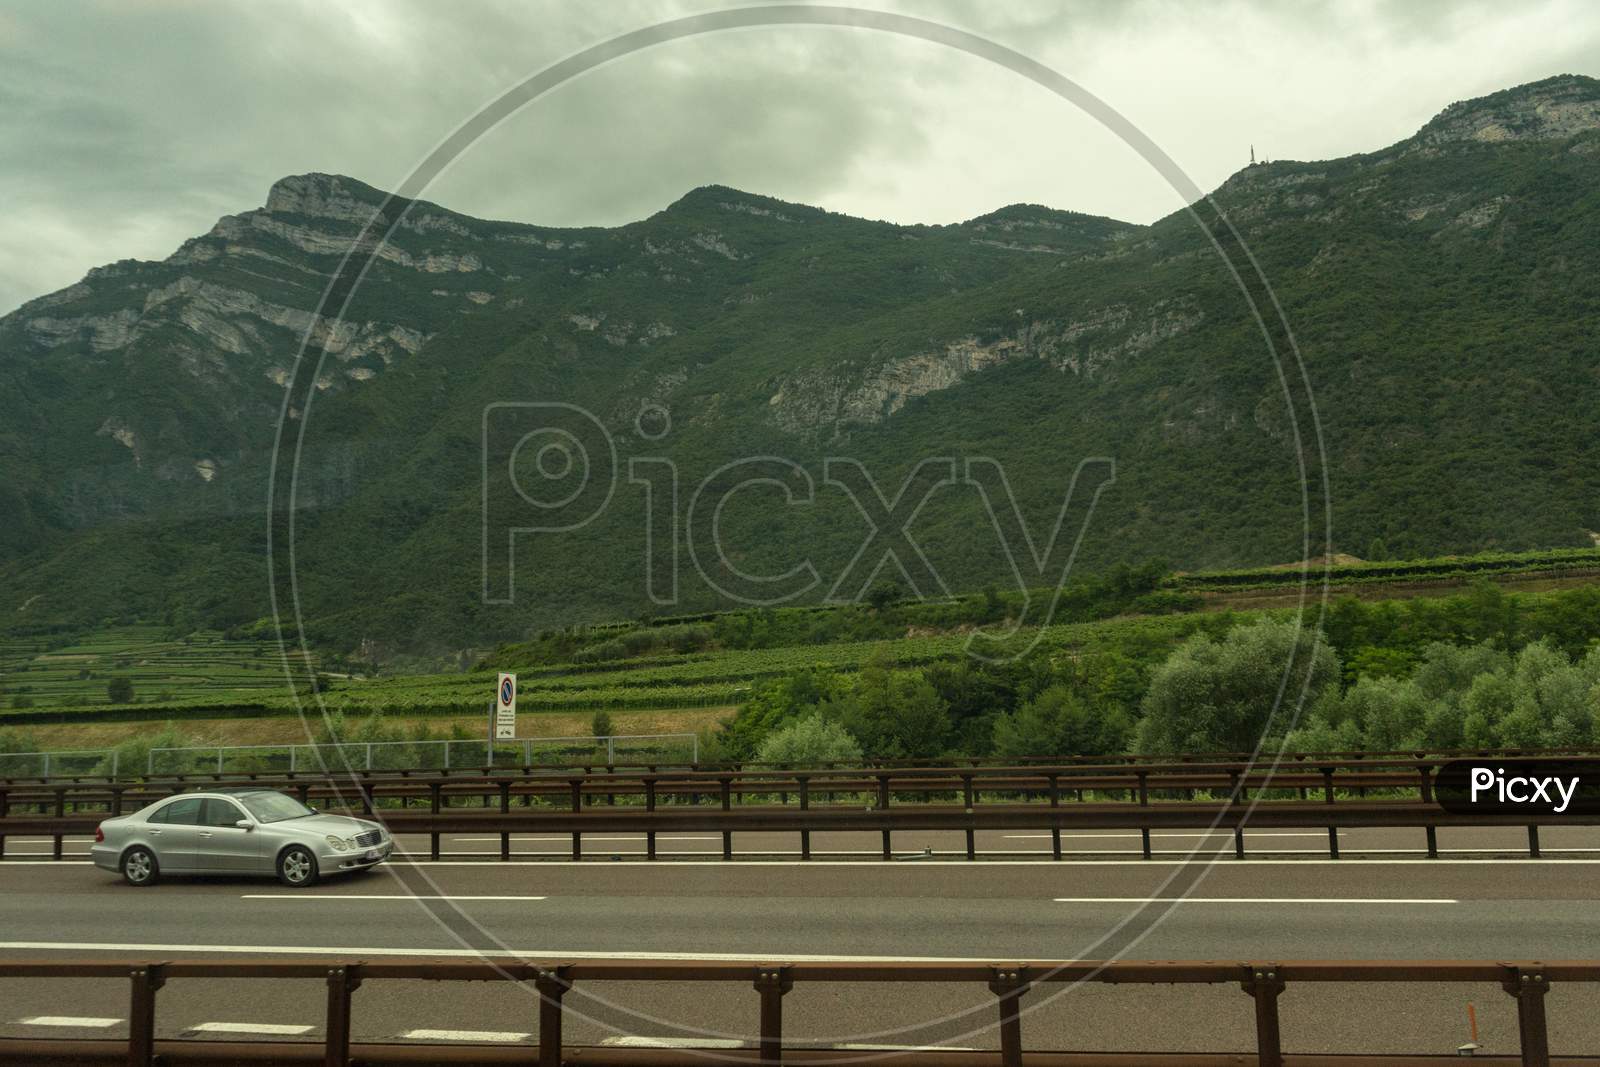 Italy - 28 June 2018: The Road Highway In The Italian Outskirts With A Mercedes Car